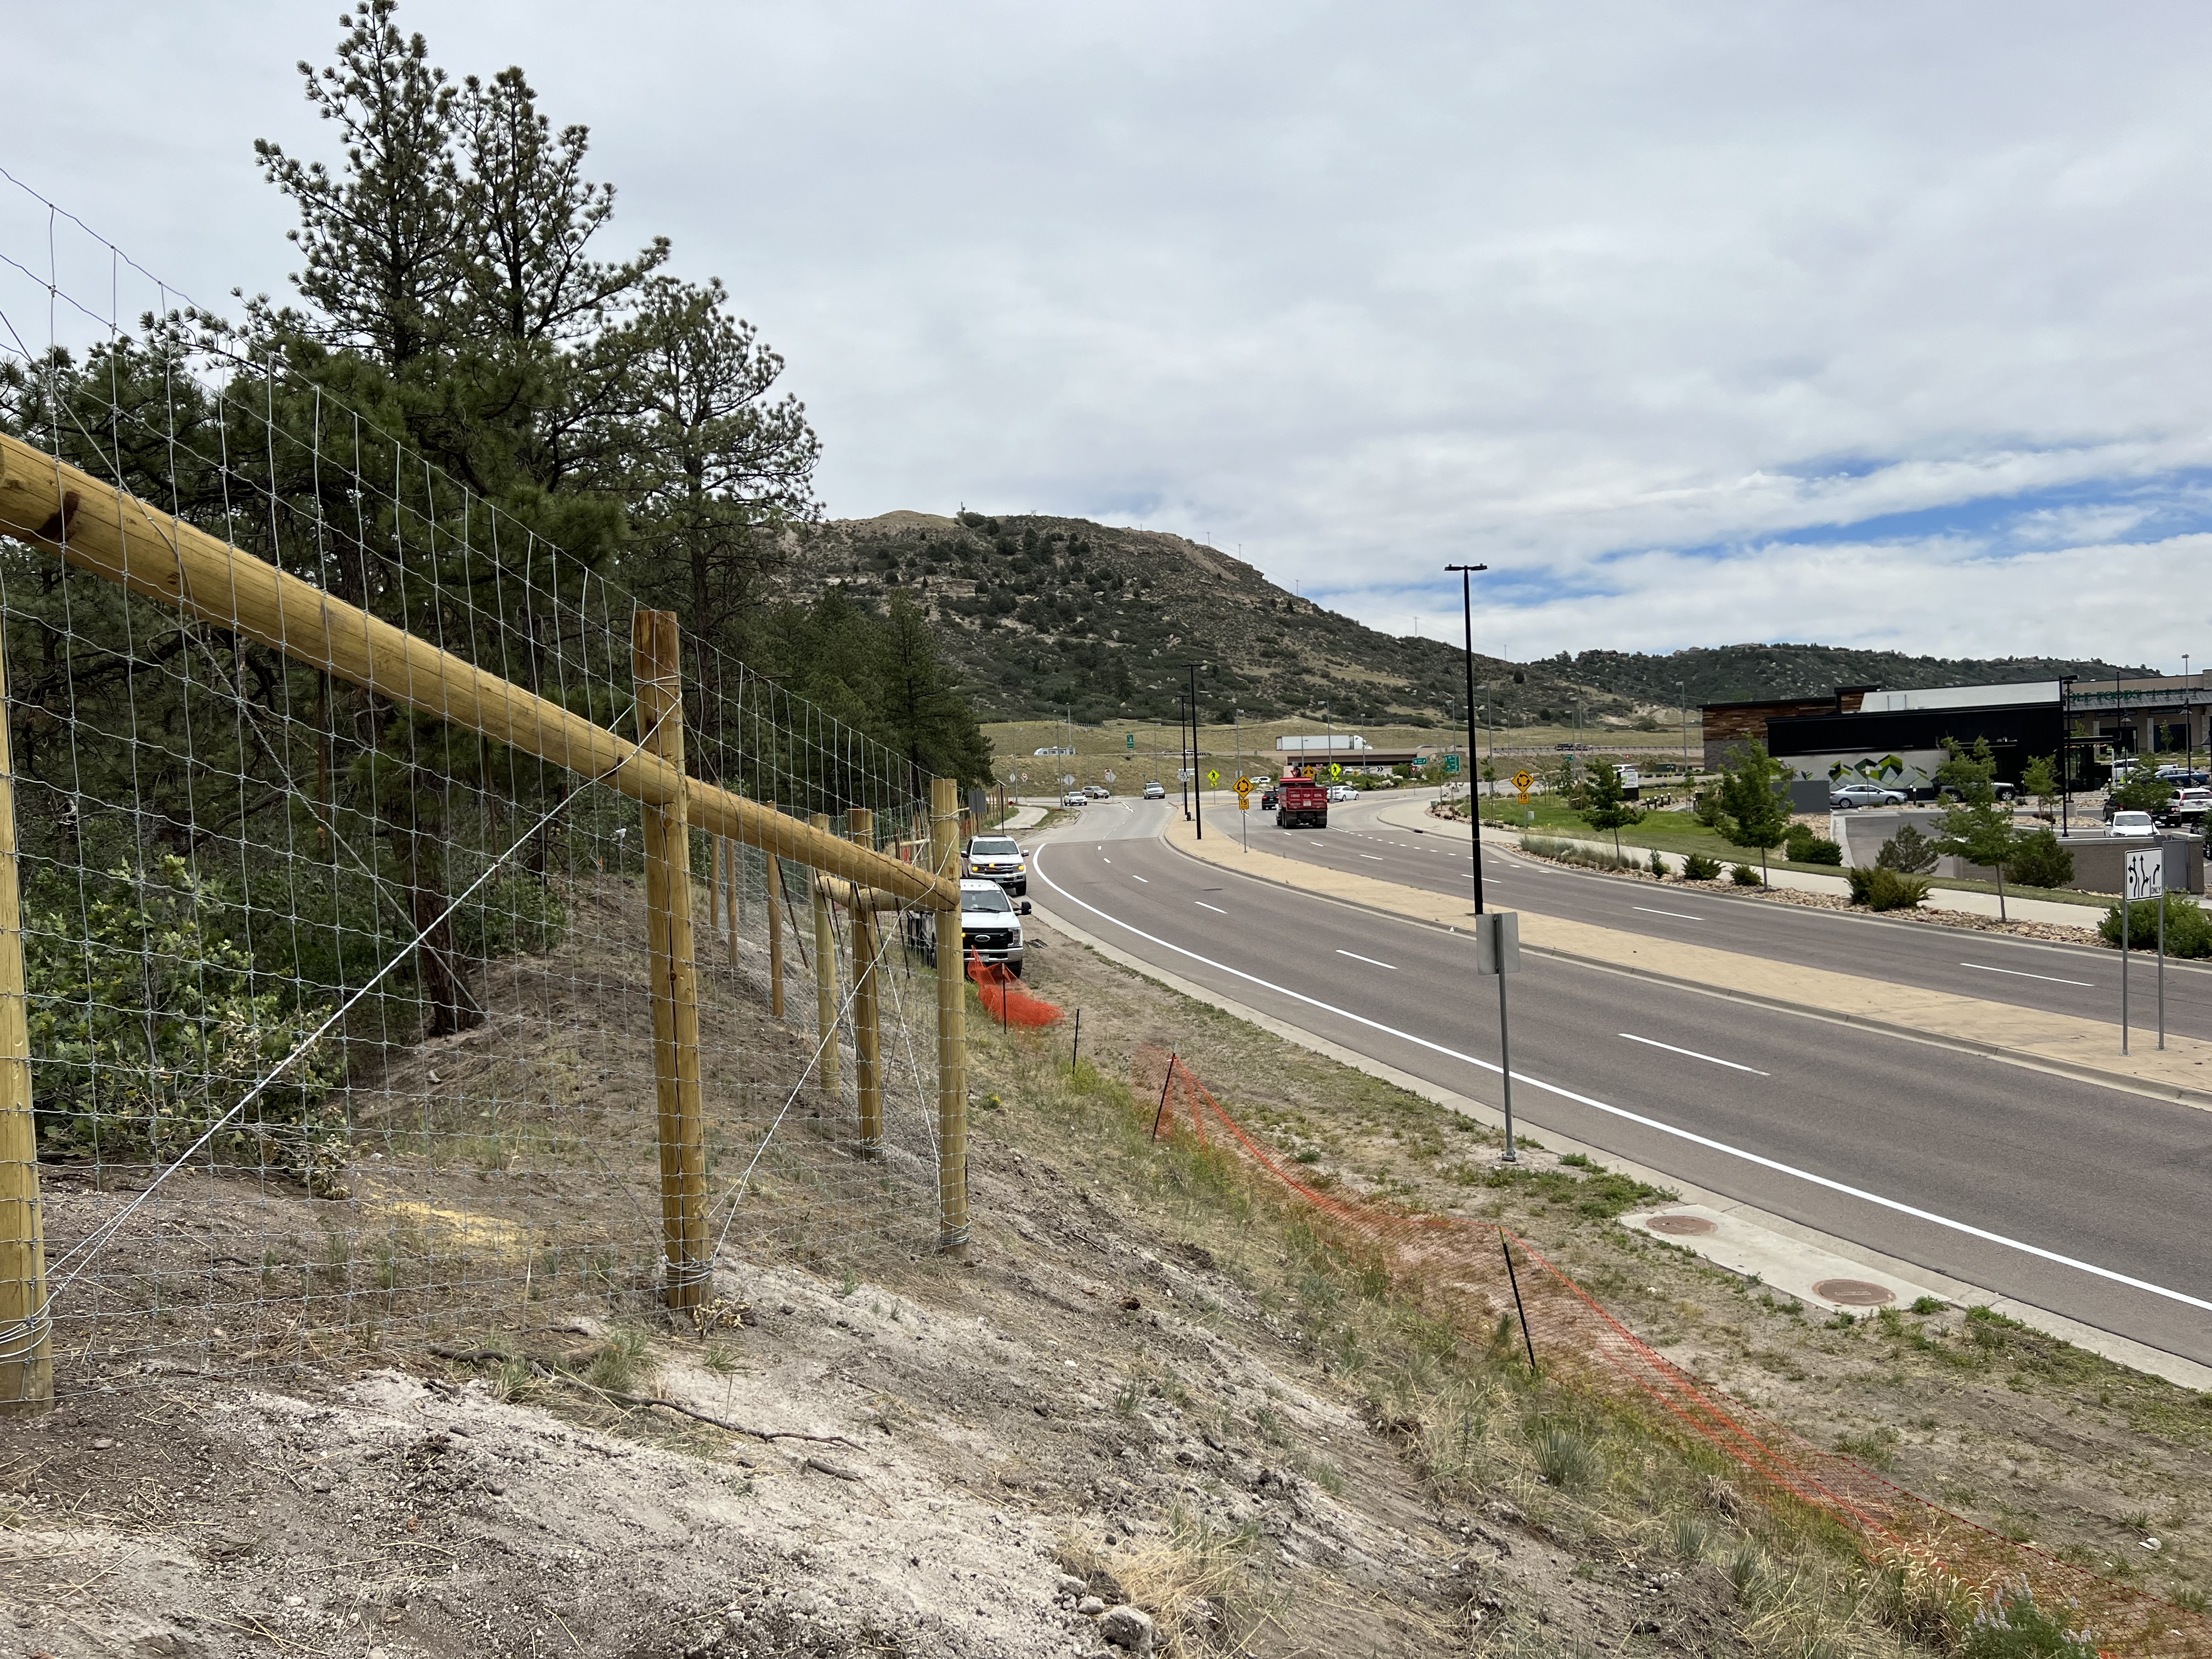 Wildlife fencing project progressing in Douglas County detail image